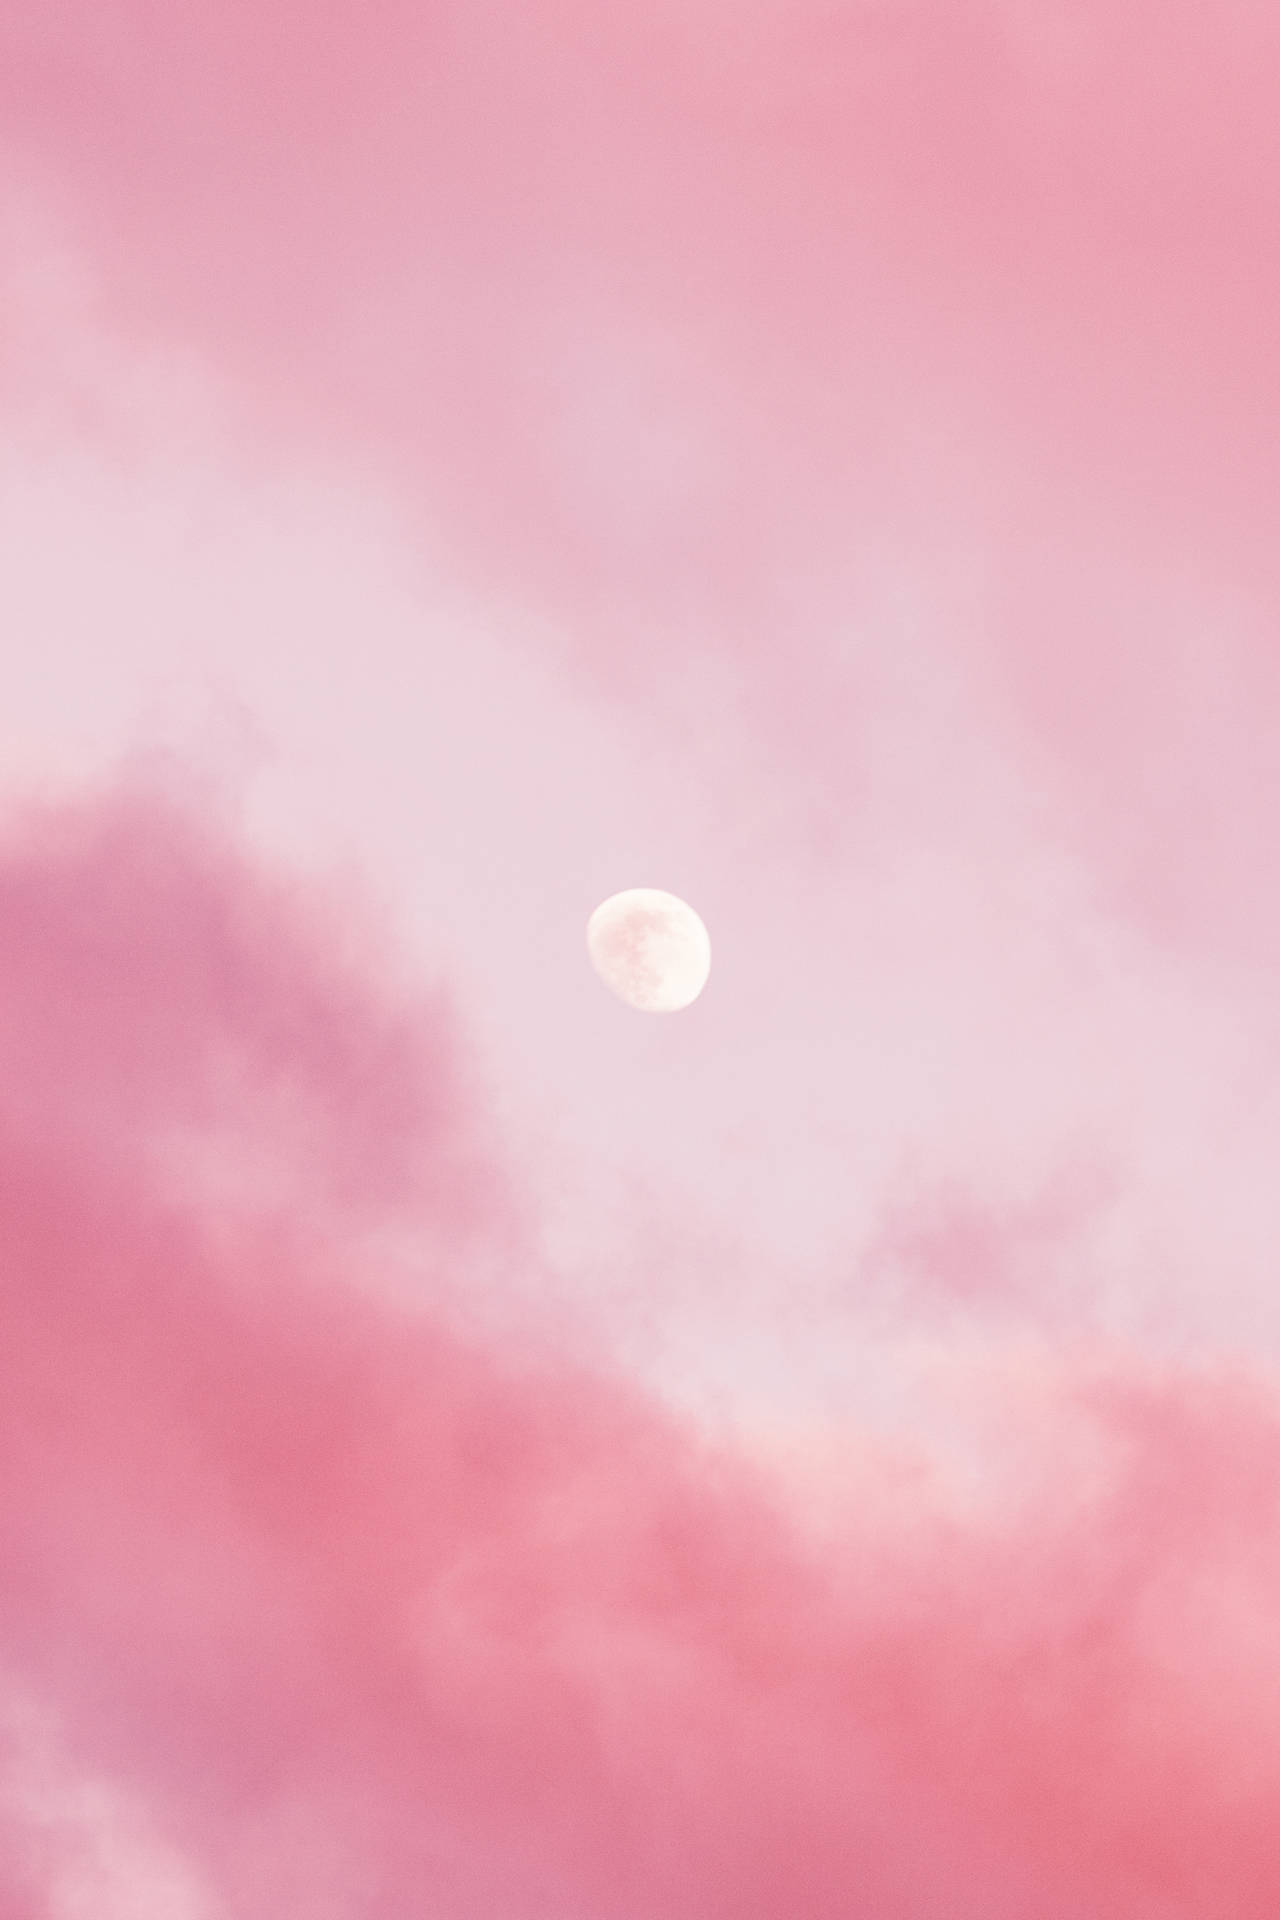 2610X3916 Pink Aesthetic Wallpaper and Background